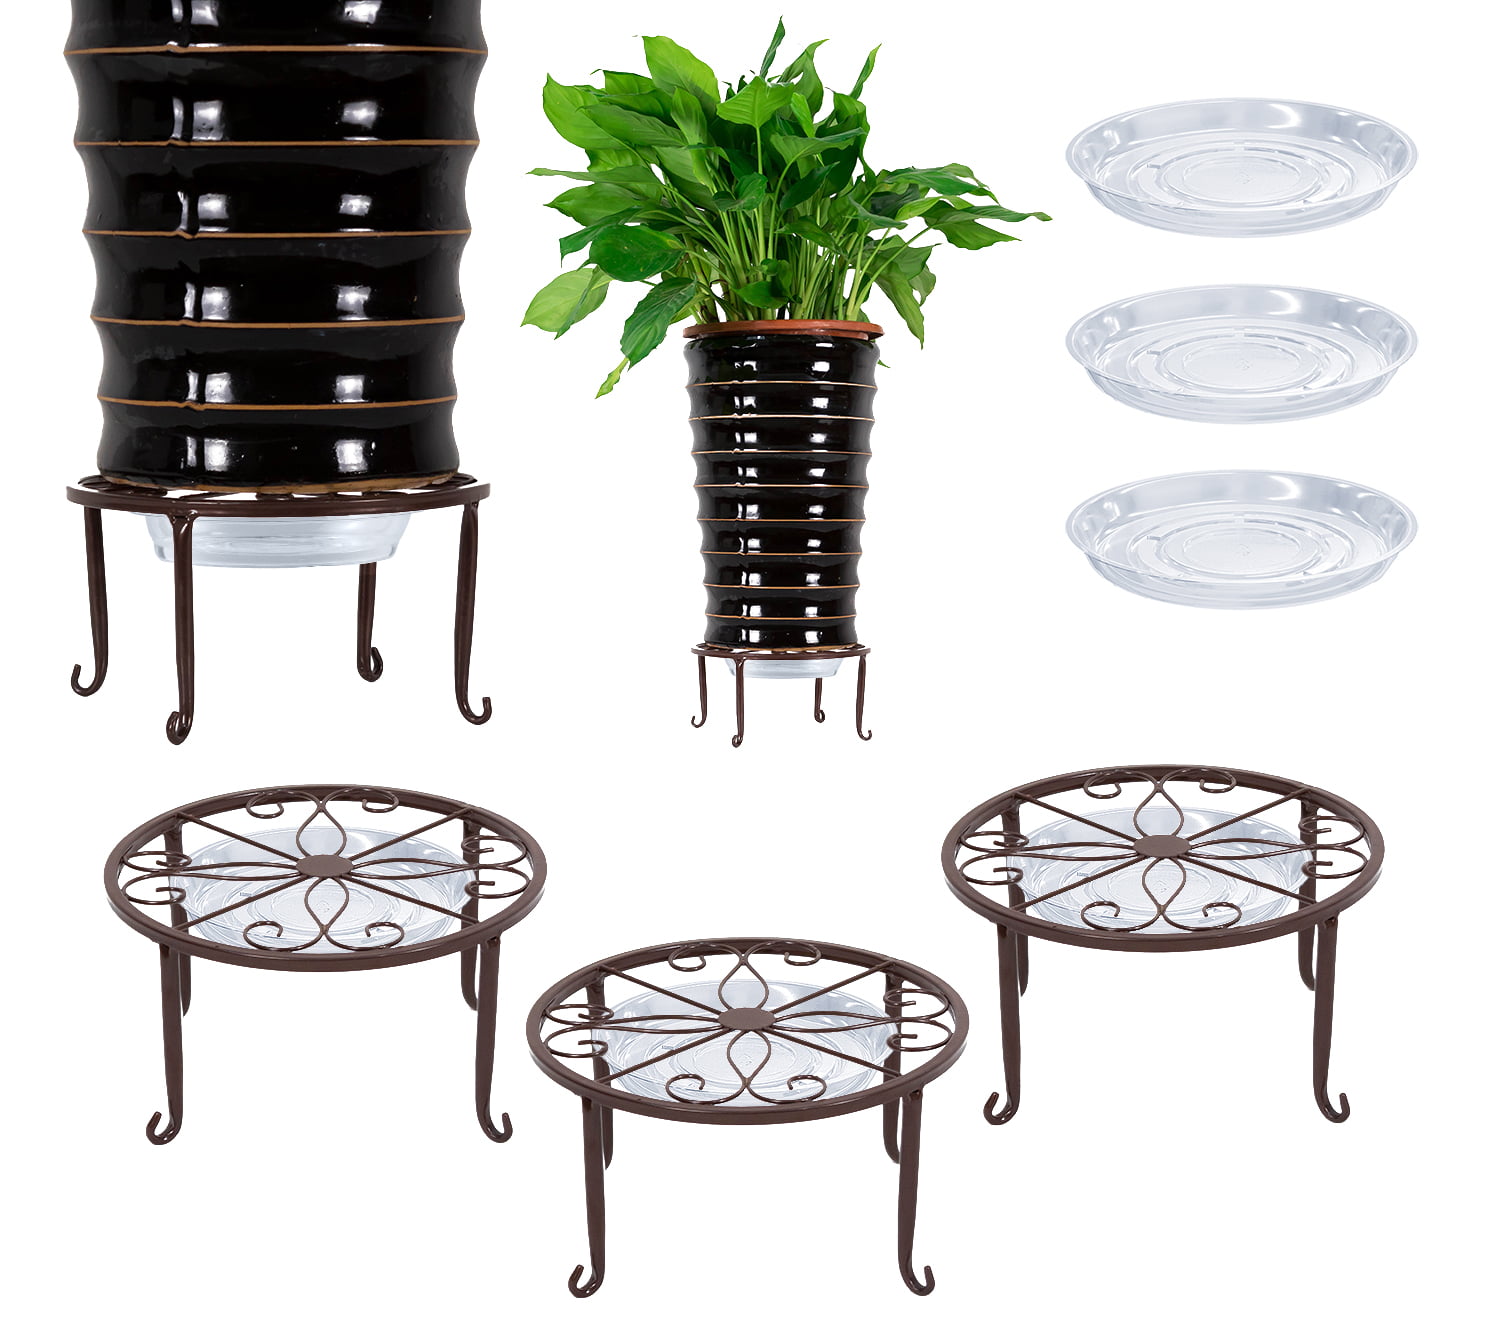 3 Pack Iron Black Antirust Plant Stand,Stable Easy Movable Potted Holder